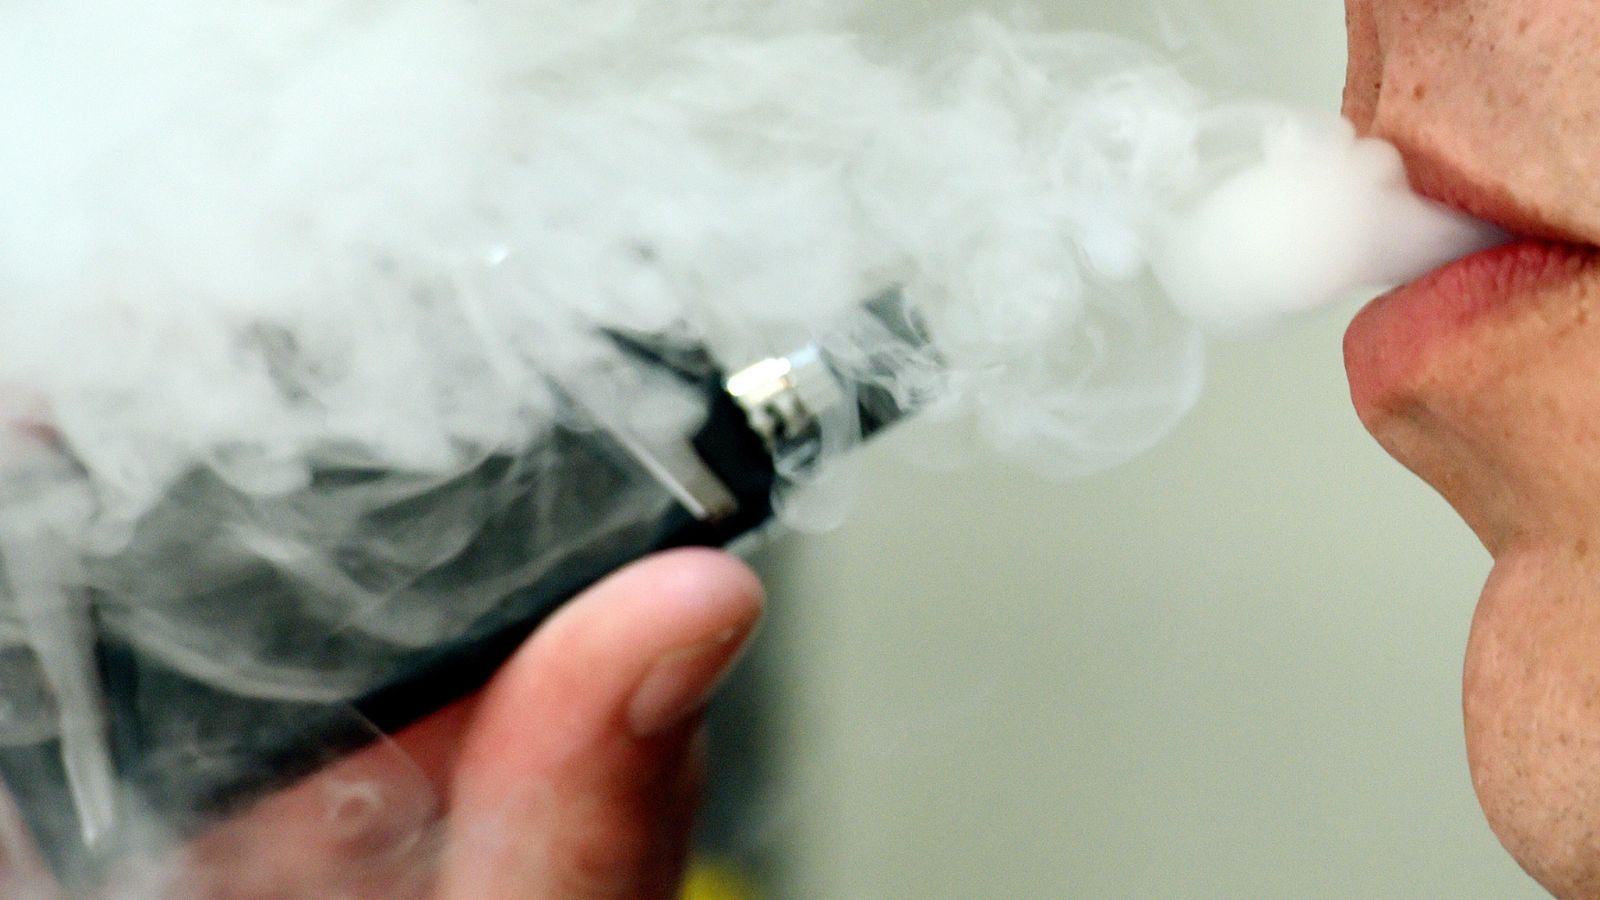 Children 'so addicted to vapes they can't last lesson without one' - as mother of teenager who died issues warning